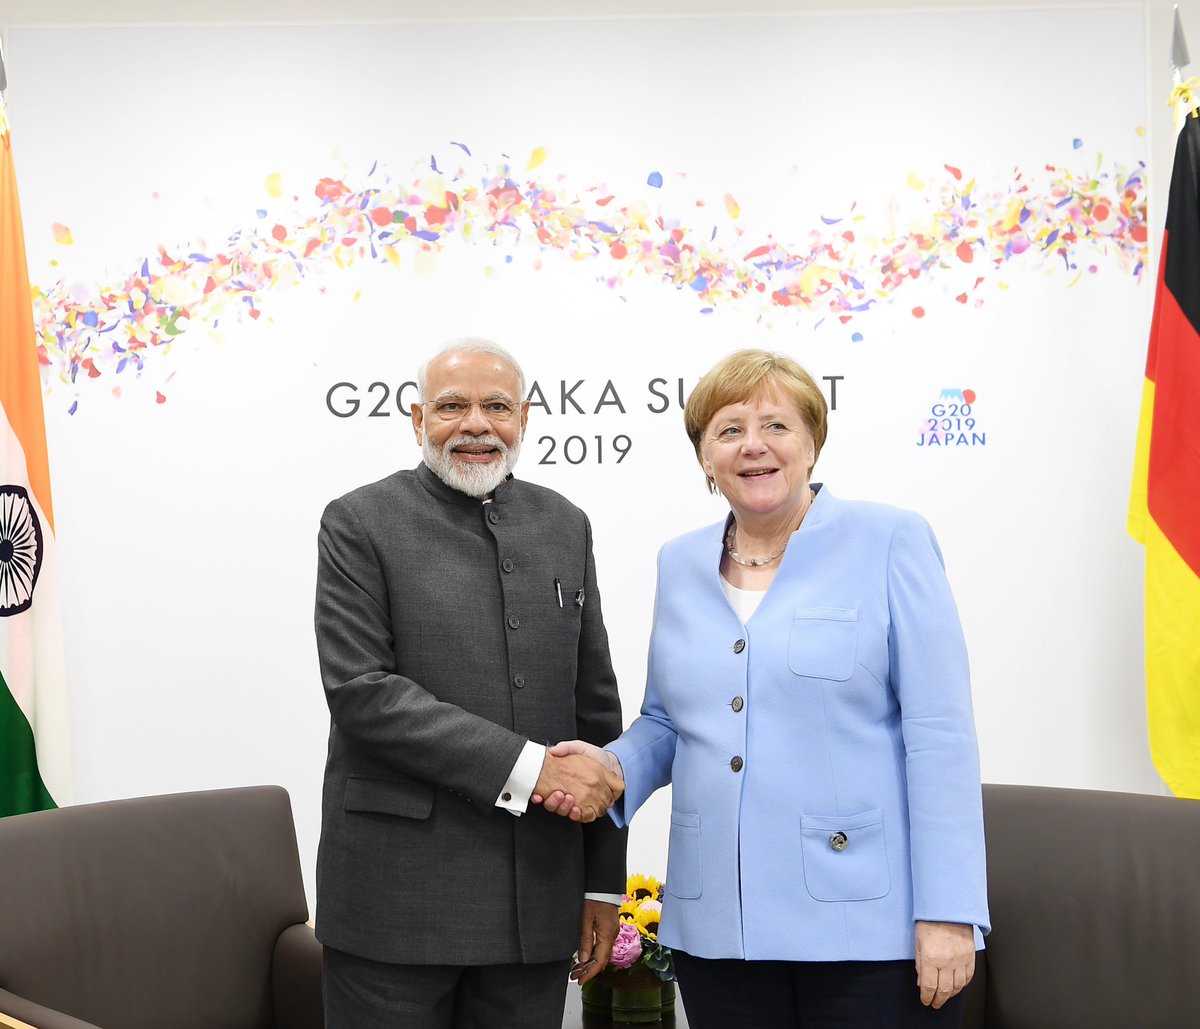 PM Modi Had Detailed Discussions With Chancellor Merkel